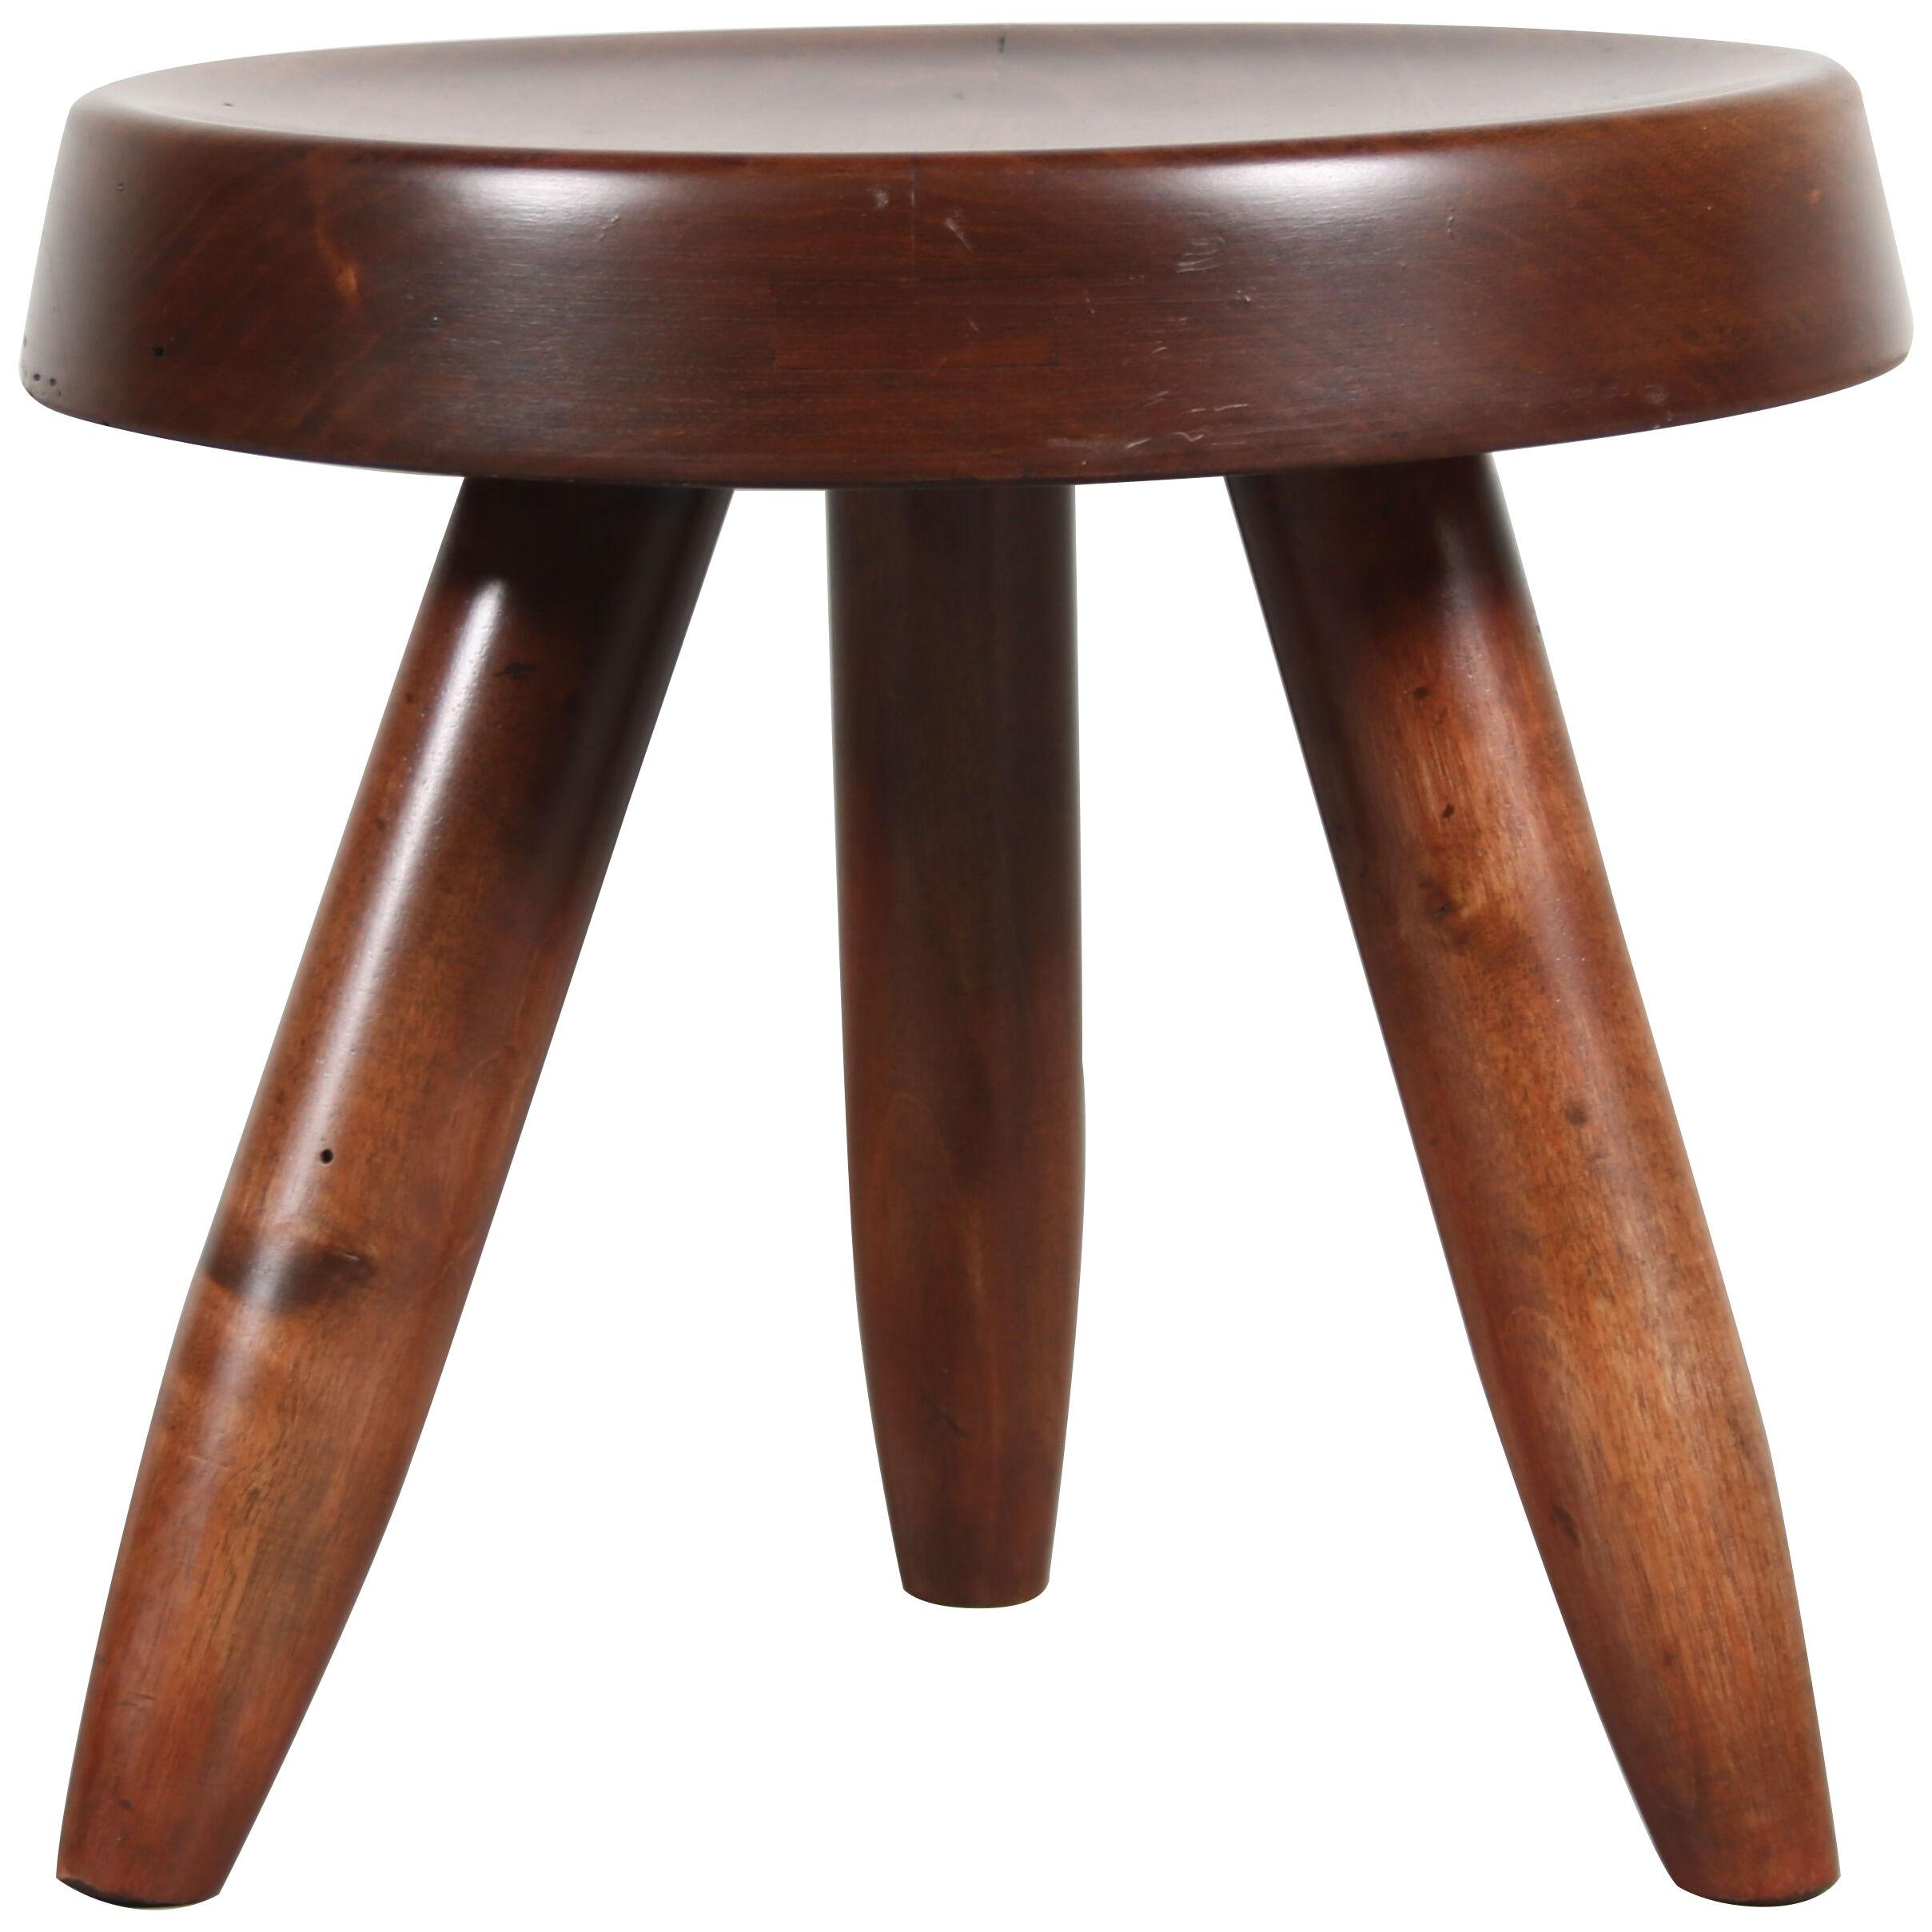 1950s Tripod stool by Charlotte Perriand for Les Arcs, France